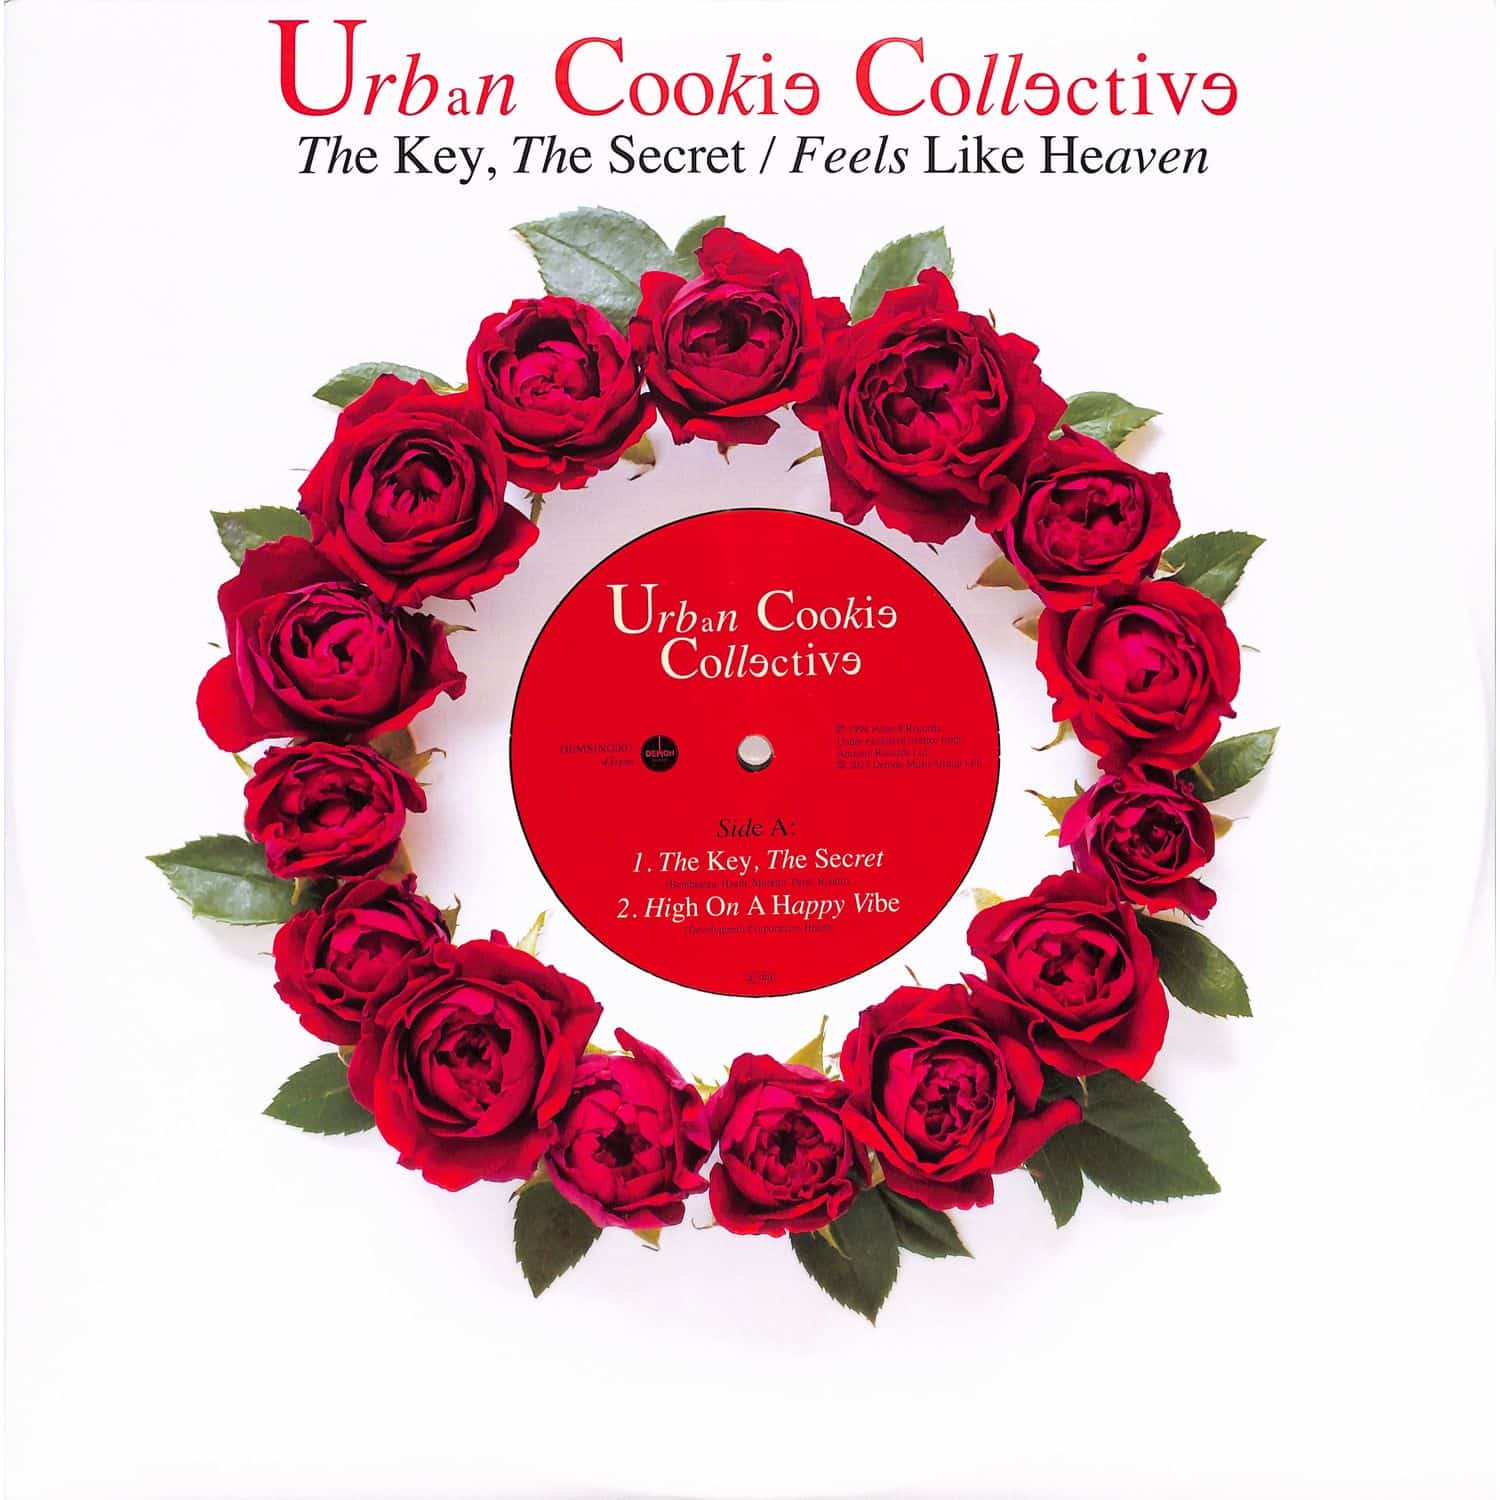 Urban Cookie Collective - THE KEY, THE SECRET / FEELS LIKE HEAVEN